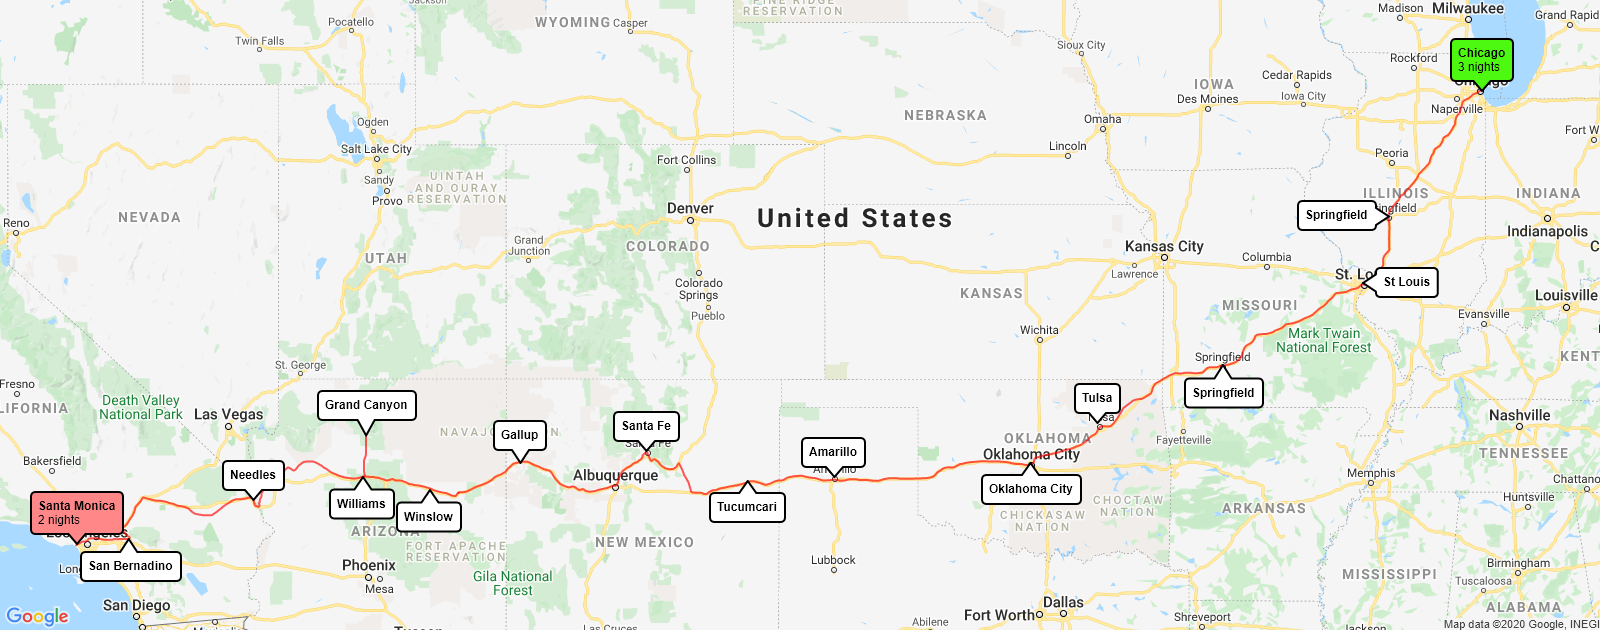 route 66 itinerary uk